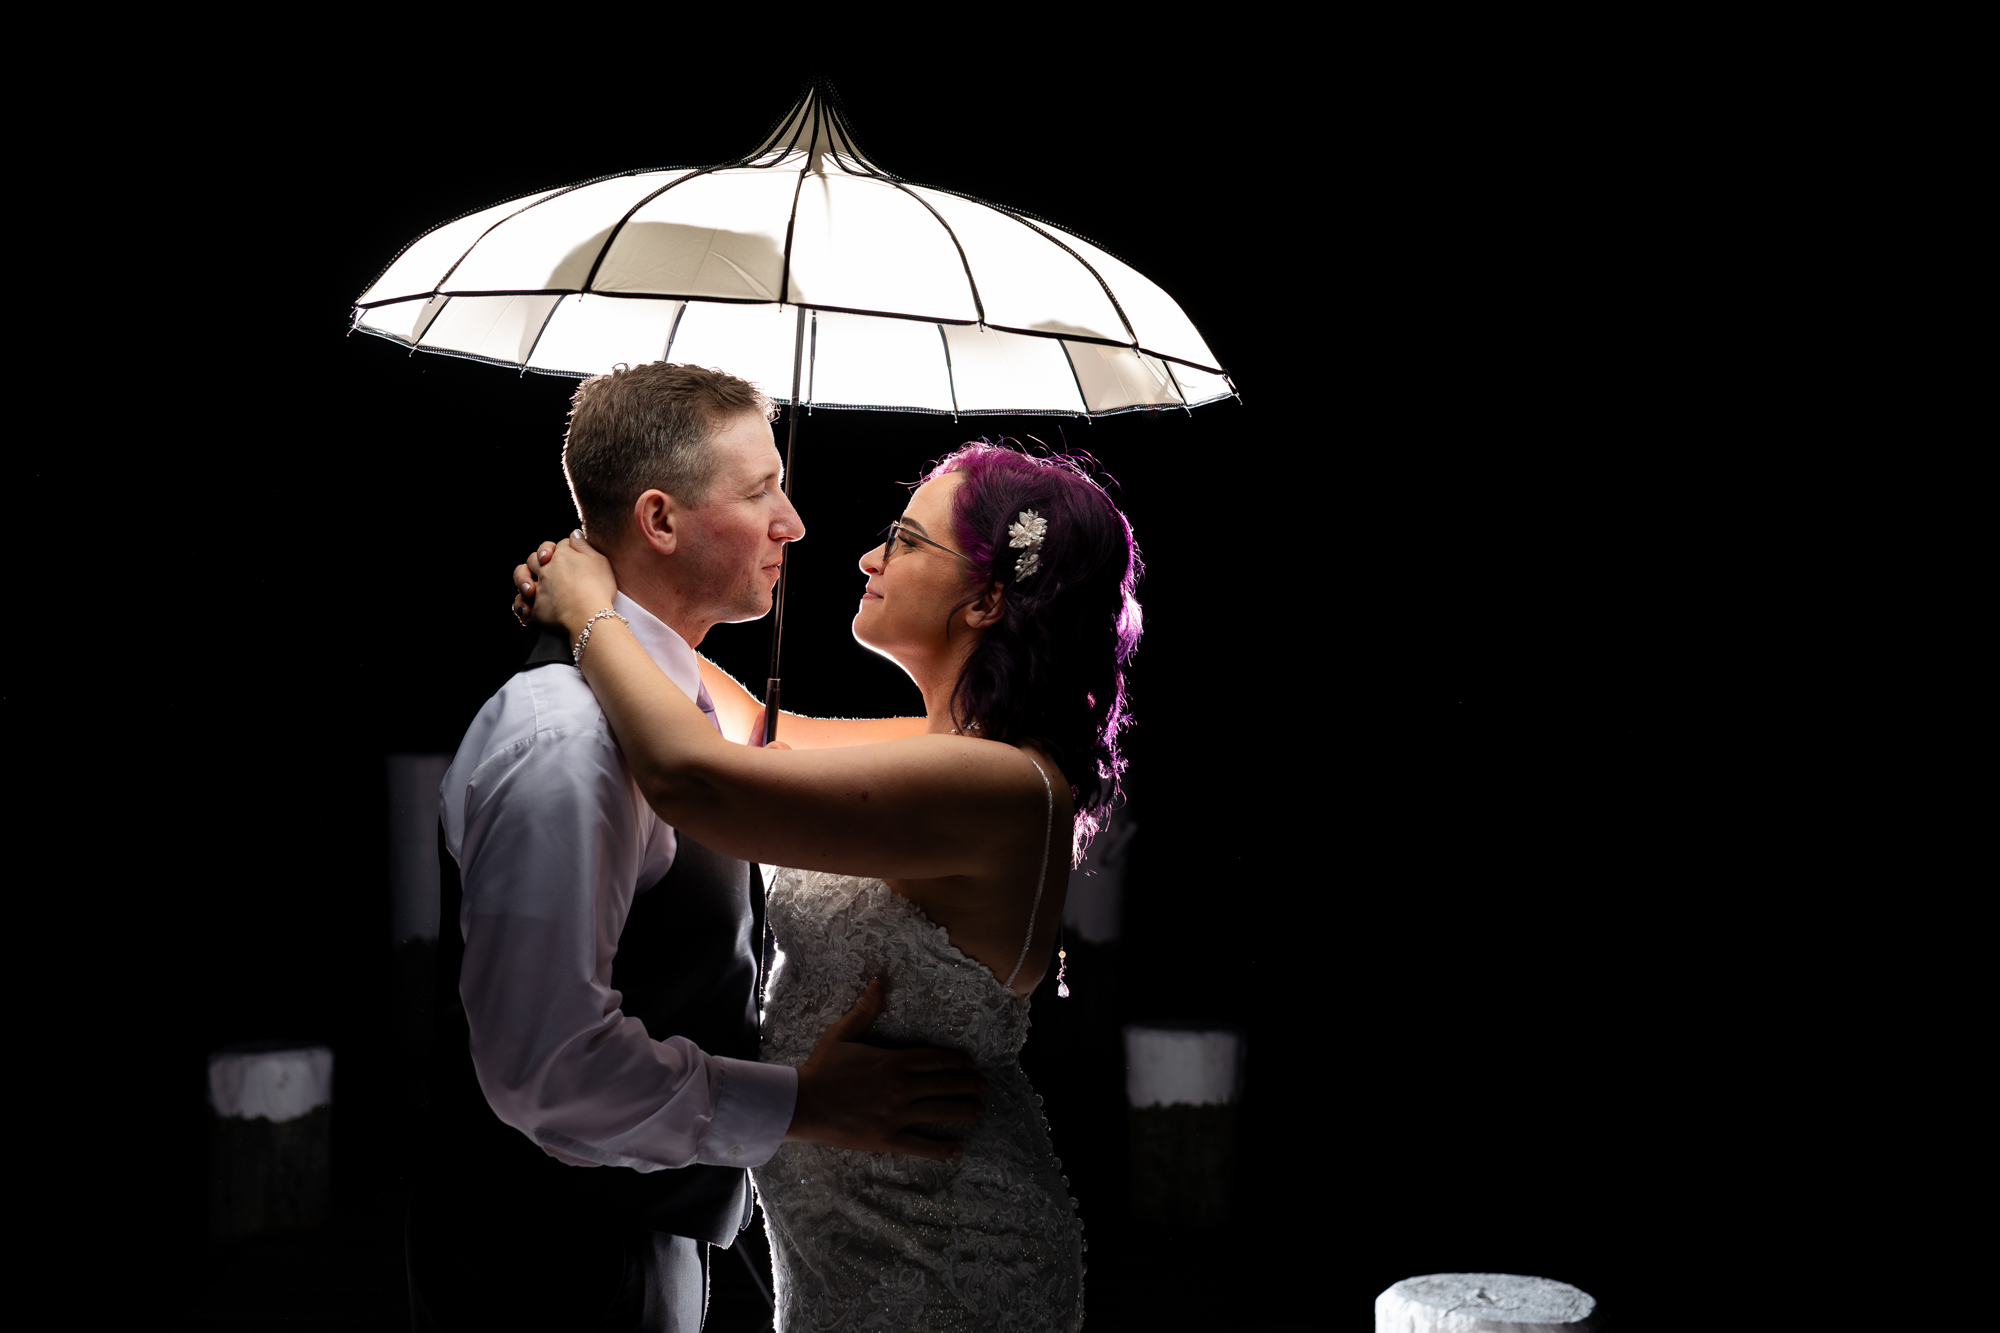 Wedding photography at Celebrations at the Bay. A beautiful bride & groom backlit with an umbrella at night.